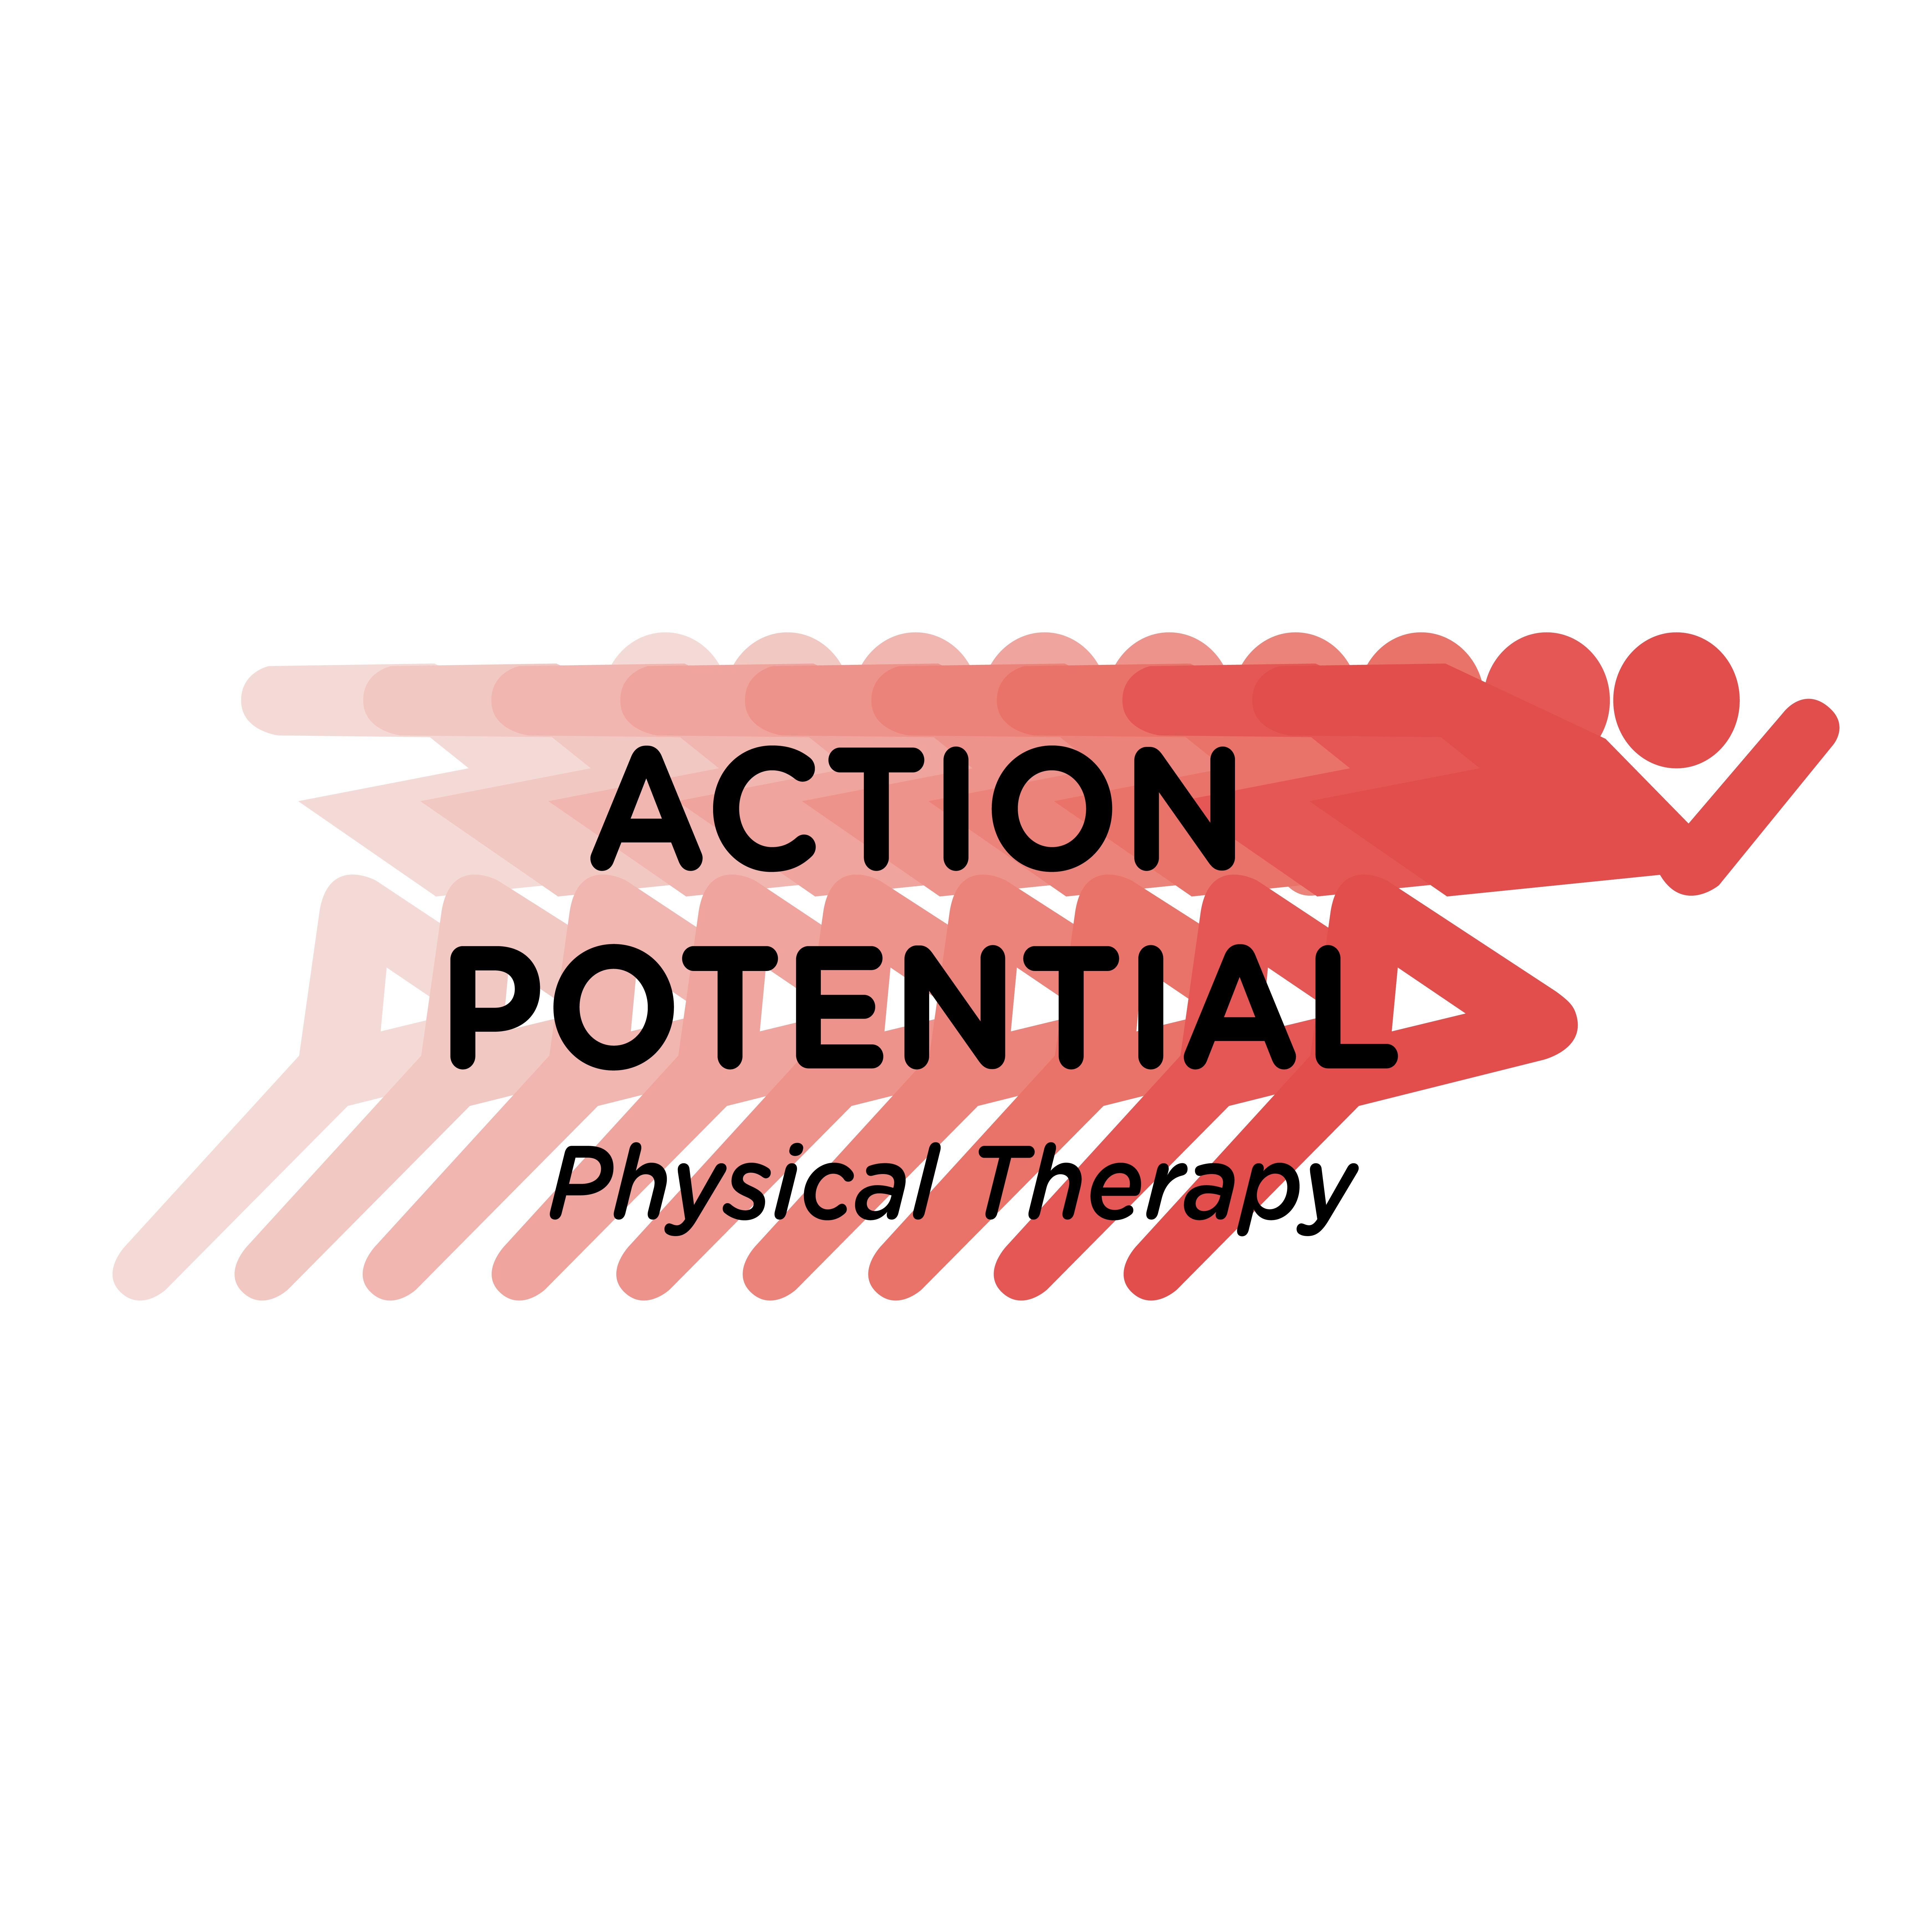 Action Potential Physical Therapy - Colorado Springs, Austin Bluffs Pkwy.